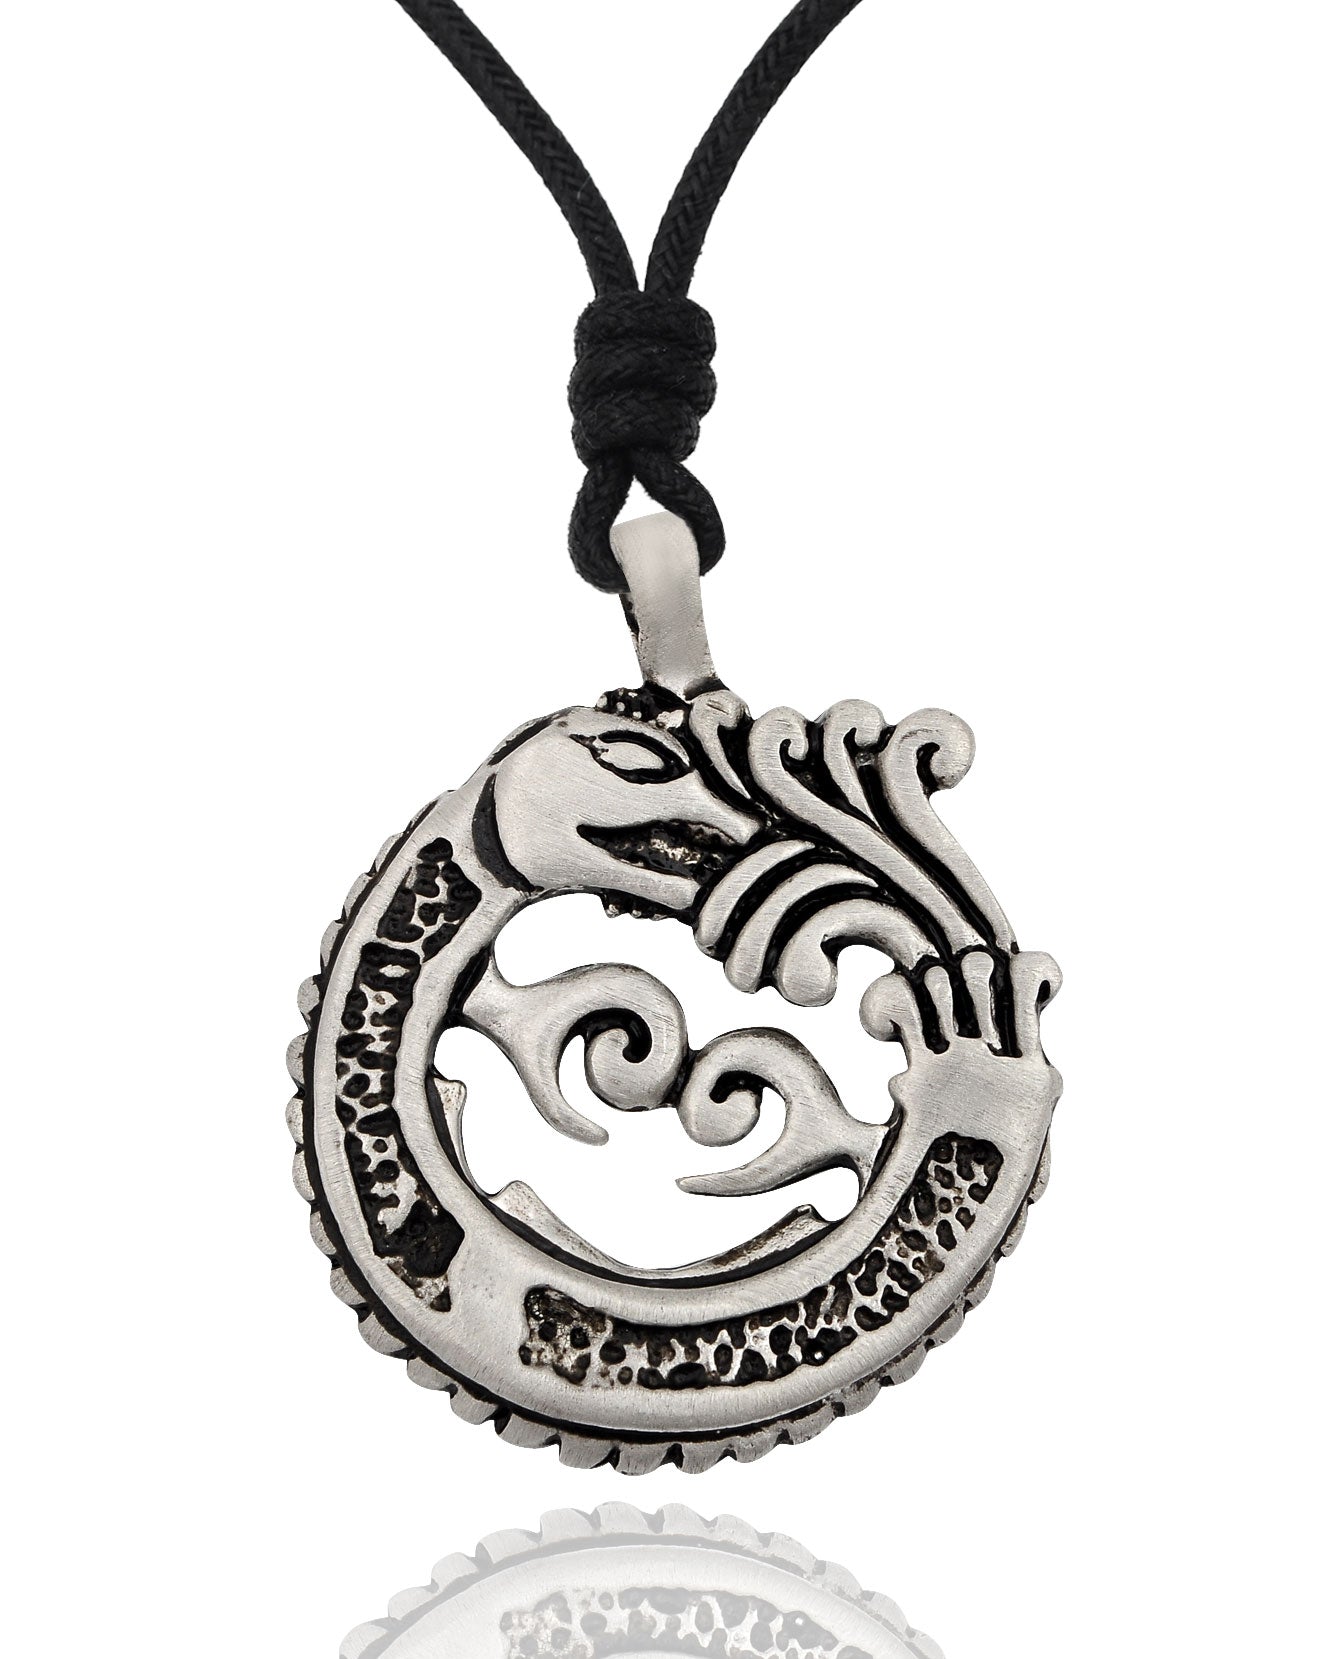 Stunning Dragon Crest Silver Pewter Charm Necklace Pendant Jewelry